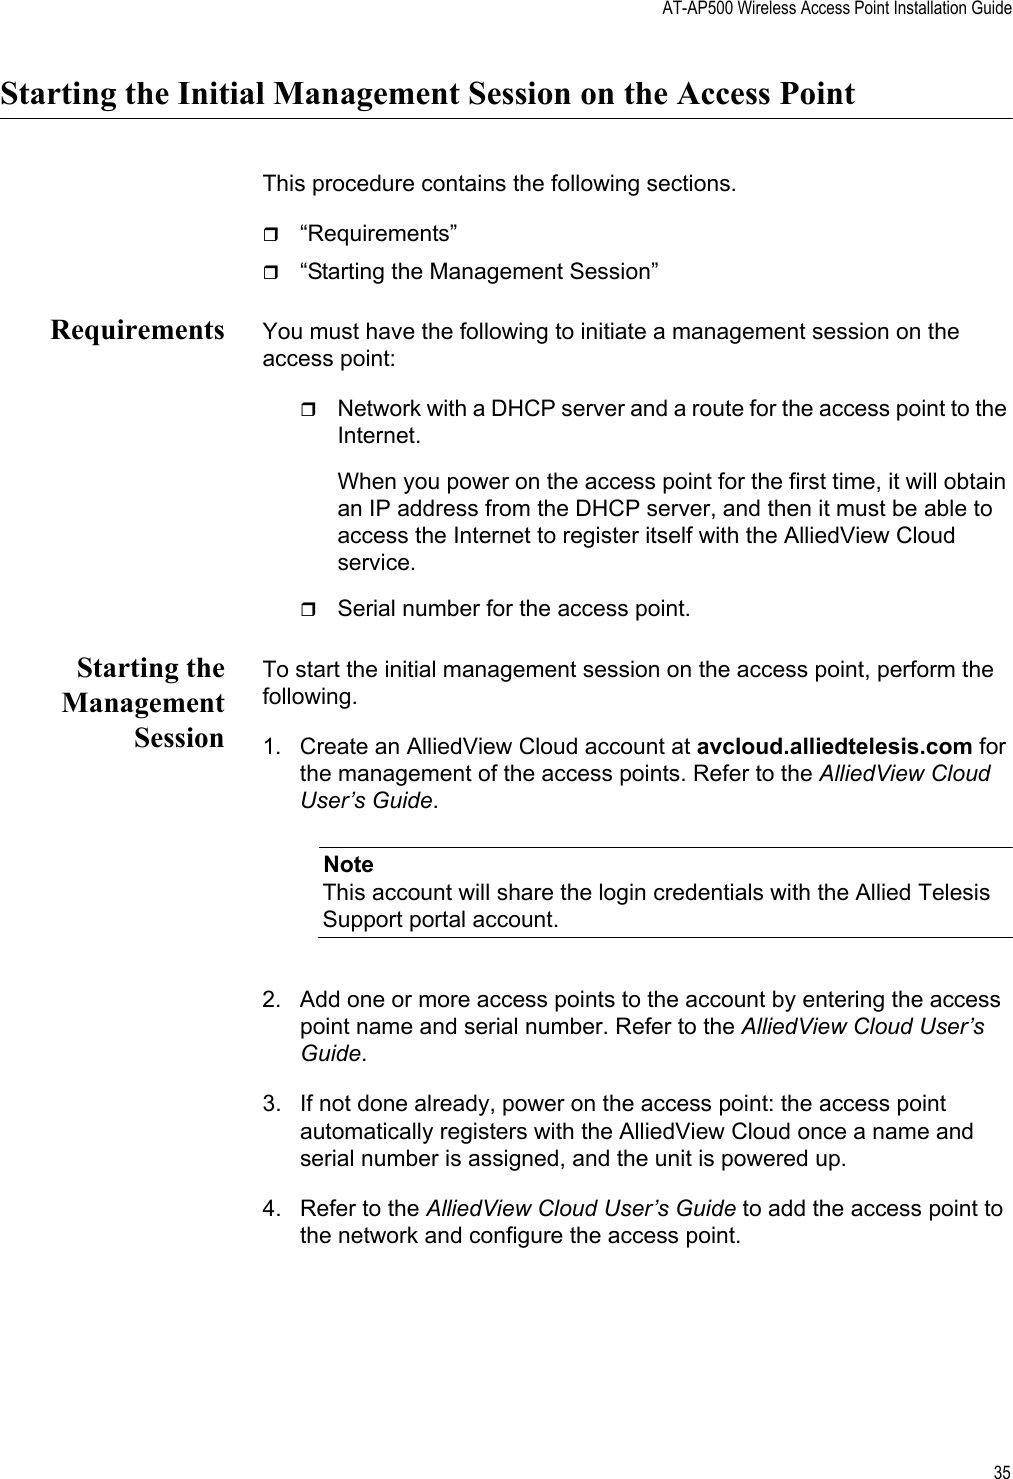 AT-AP500 Wireless Access Point Installation Guide35Starting the Initial Management Session on the Access PointThis procedure contains the following sections.“Requirements”“Starting the Management Session”Requirements You must have the following to initiate a management session on the access point:Network with a DHCP server and a route for the access point to the Internet.When you power on the access point for the first time, it will obtain an IP address from the DHCP server, and then it must be able to access the Internet to register itself with the AlliedView Cloud service.Serial number for the access point.Starting theManagementSessionTo start the initial management session on the access point, perform the following.1. Create an AlliedView Cloud account at avcloud.alliedtelesis.com for the management of the access points. Refer to the AlliedView Cloud User’s Guide.NoteThis account will share the login credentials with the Allied Telesis Support portal account.2. Add one or more access points to the account by entering the access point name and serial number. Refer to the AlliedView Cloud User’s Guide.3. If not done already, power on the access point: the access point automatically registers with the AlliedView Cloud once a name and serial number is assigned, and the unit is powered up.4. Refer to the AlliedView Cloud User’s Guide to add the access point to the network and configure the access point. Review Draft 2-1-16